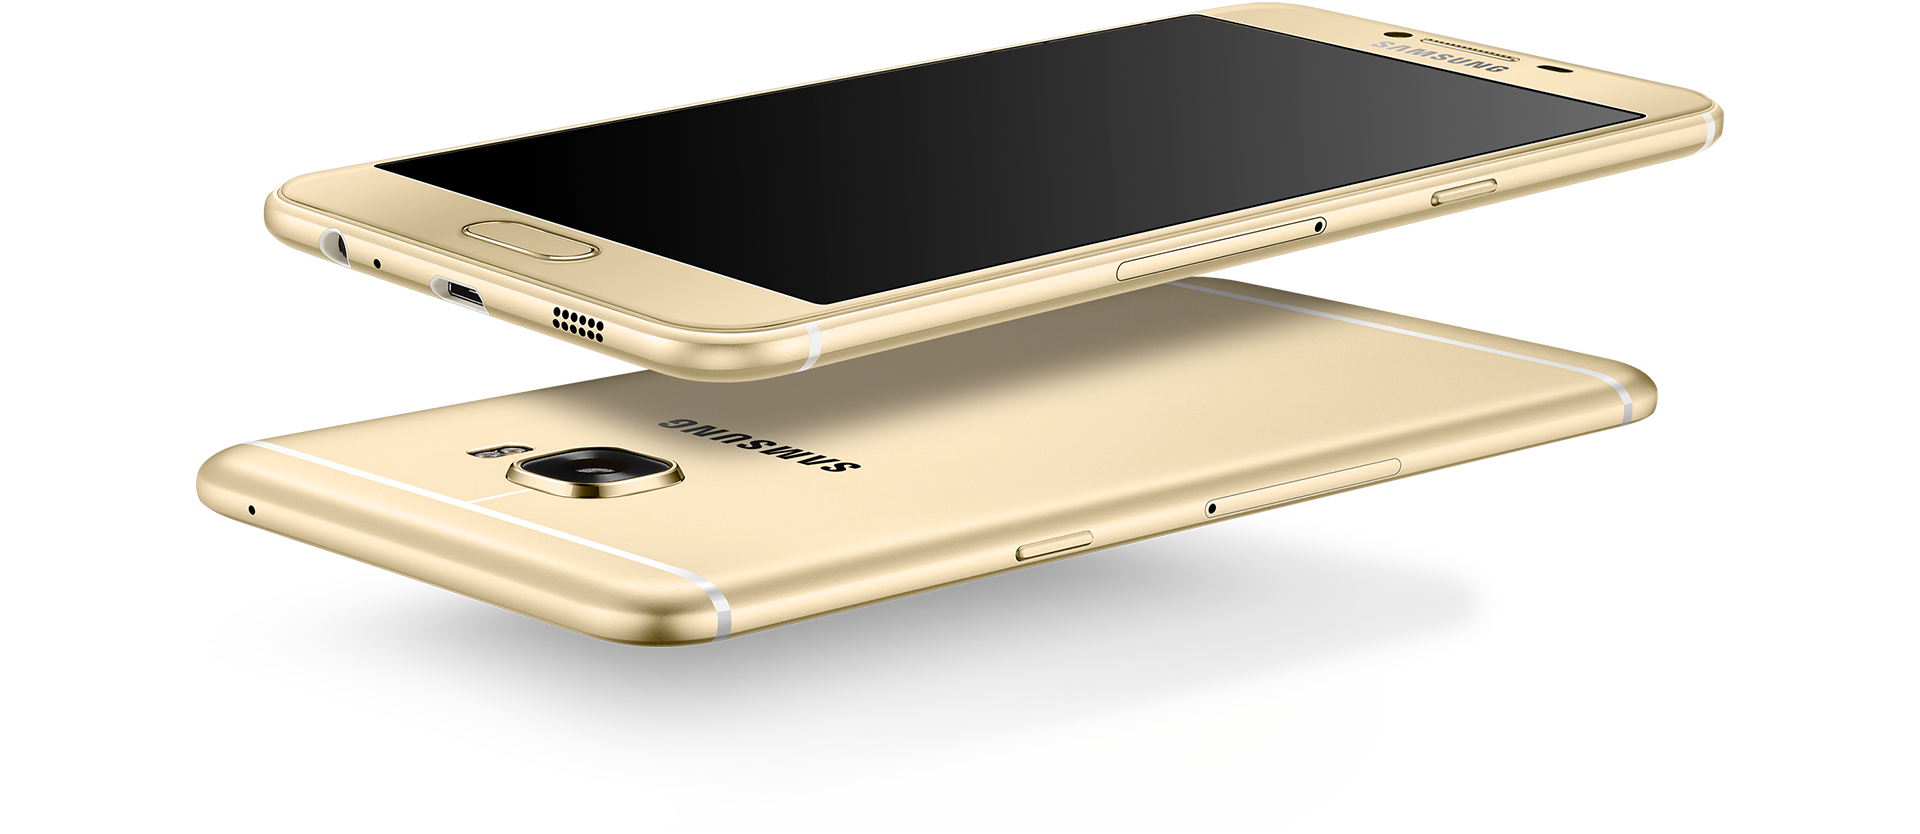 Samsung Galaxy C5 - Full Specifications - MobileDevices.com.pk